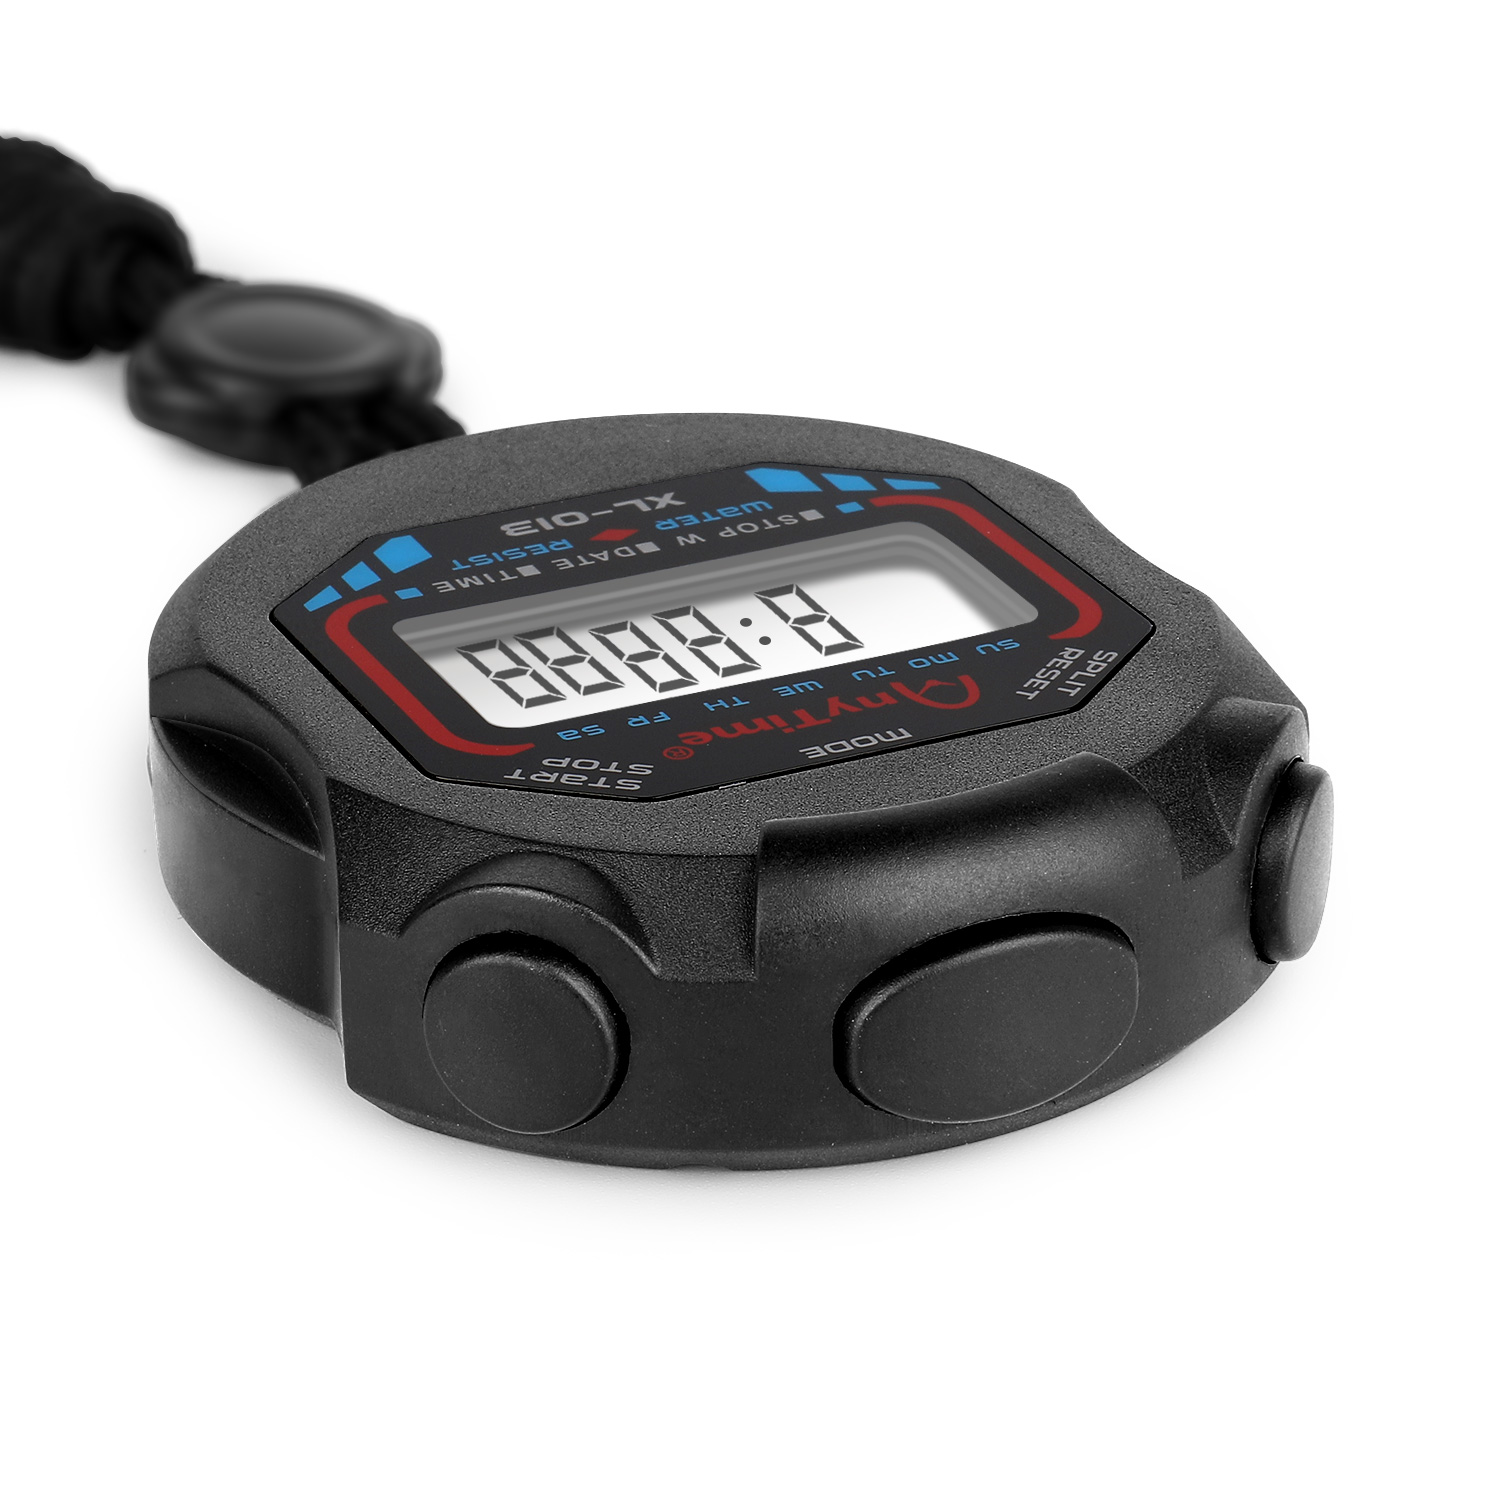 Used as chronograph, timer, stopwatch, calendar; Timer Stopwatches alarm with 4 minutes snooze